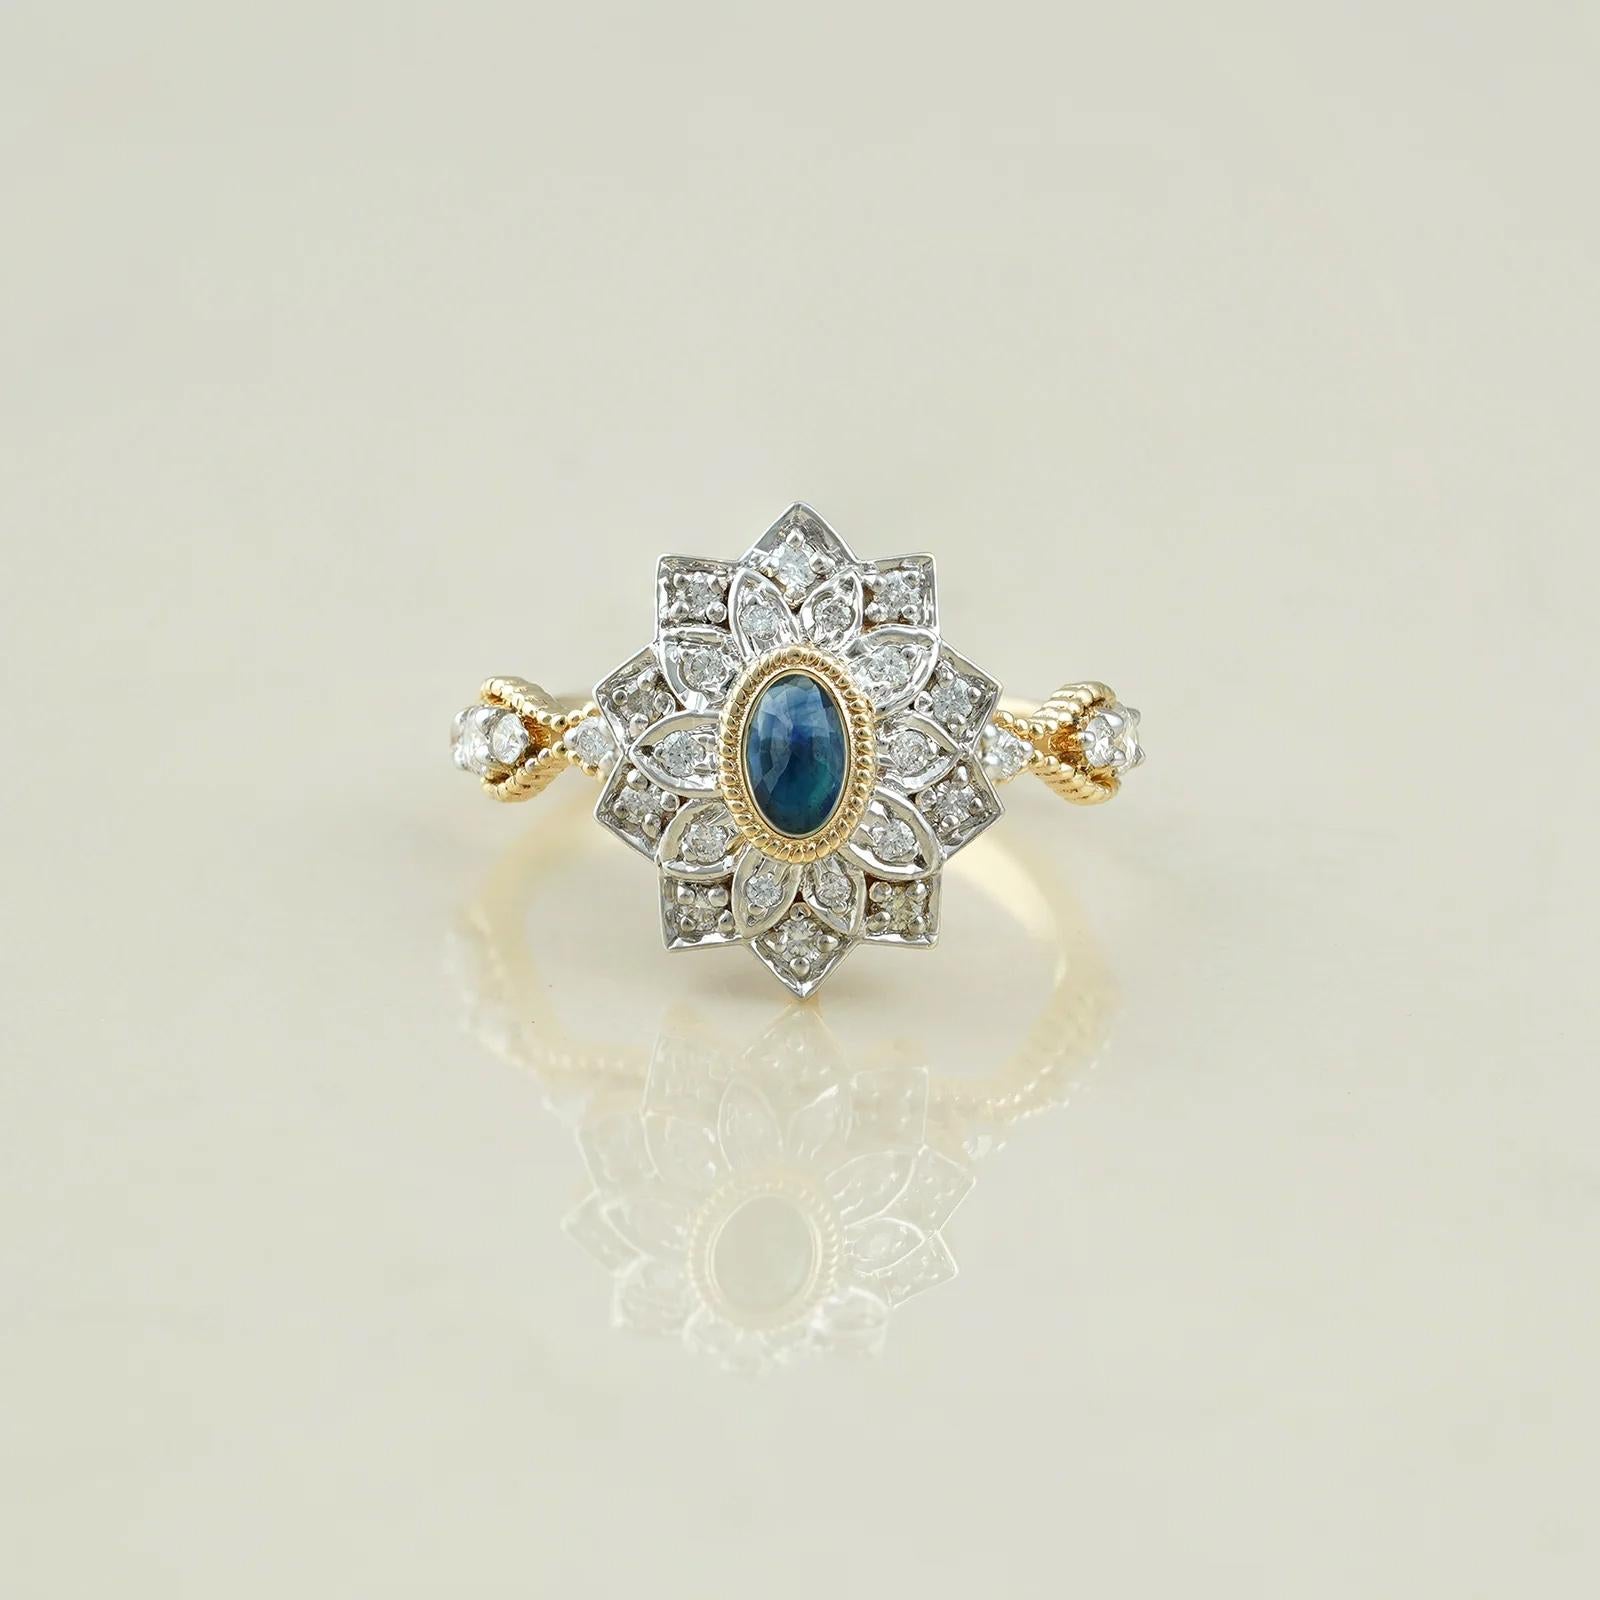 For Sale:  Moi Reha Gold Diamond and Blue Sapphire Engagement Ring 4